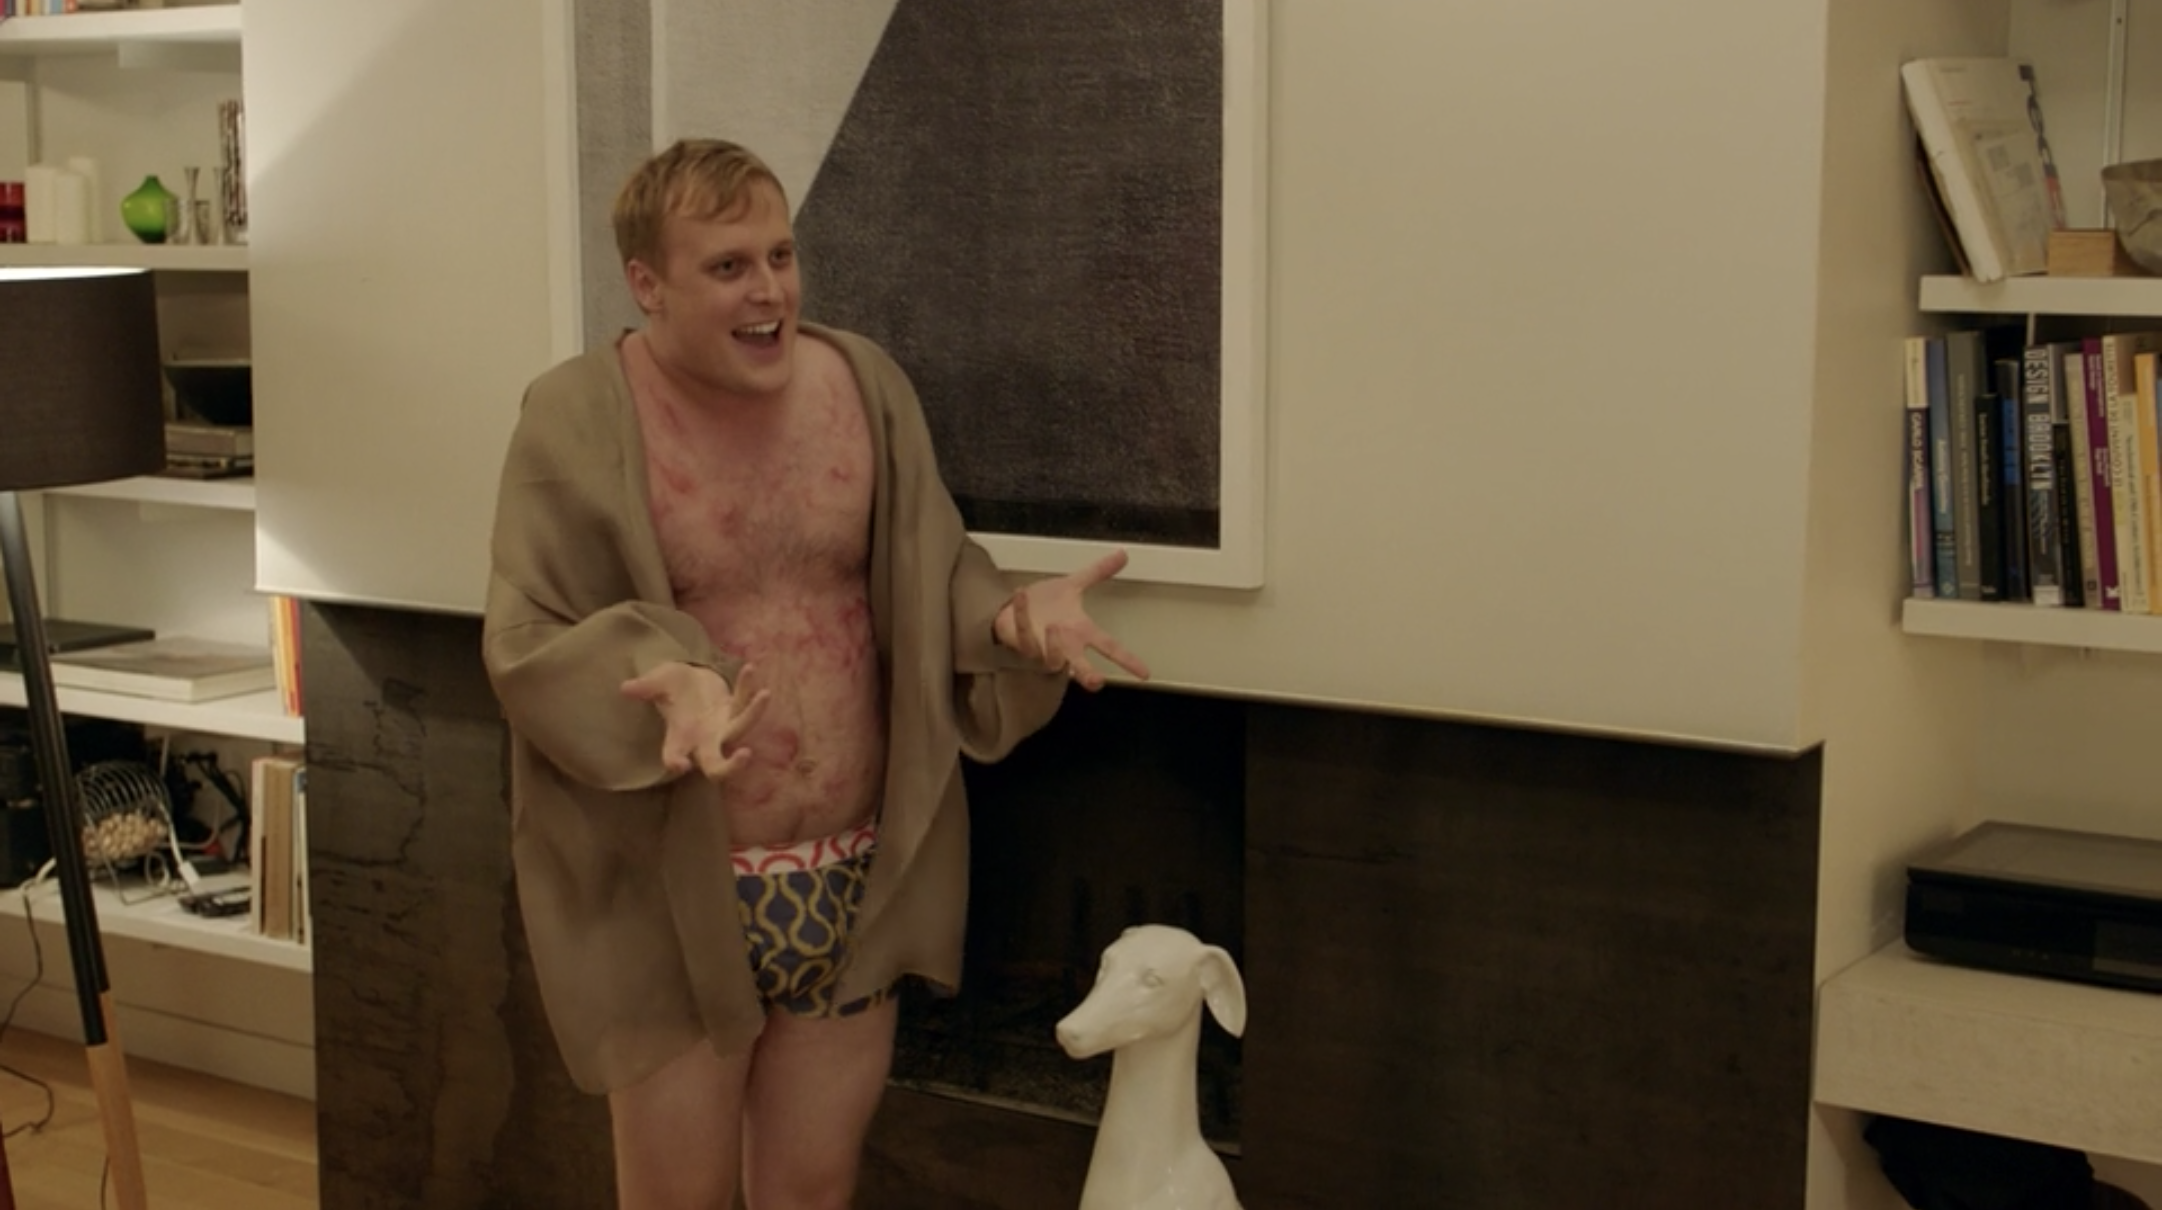 John Early in a robe with rashes on his body.